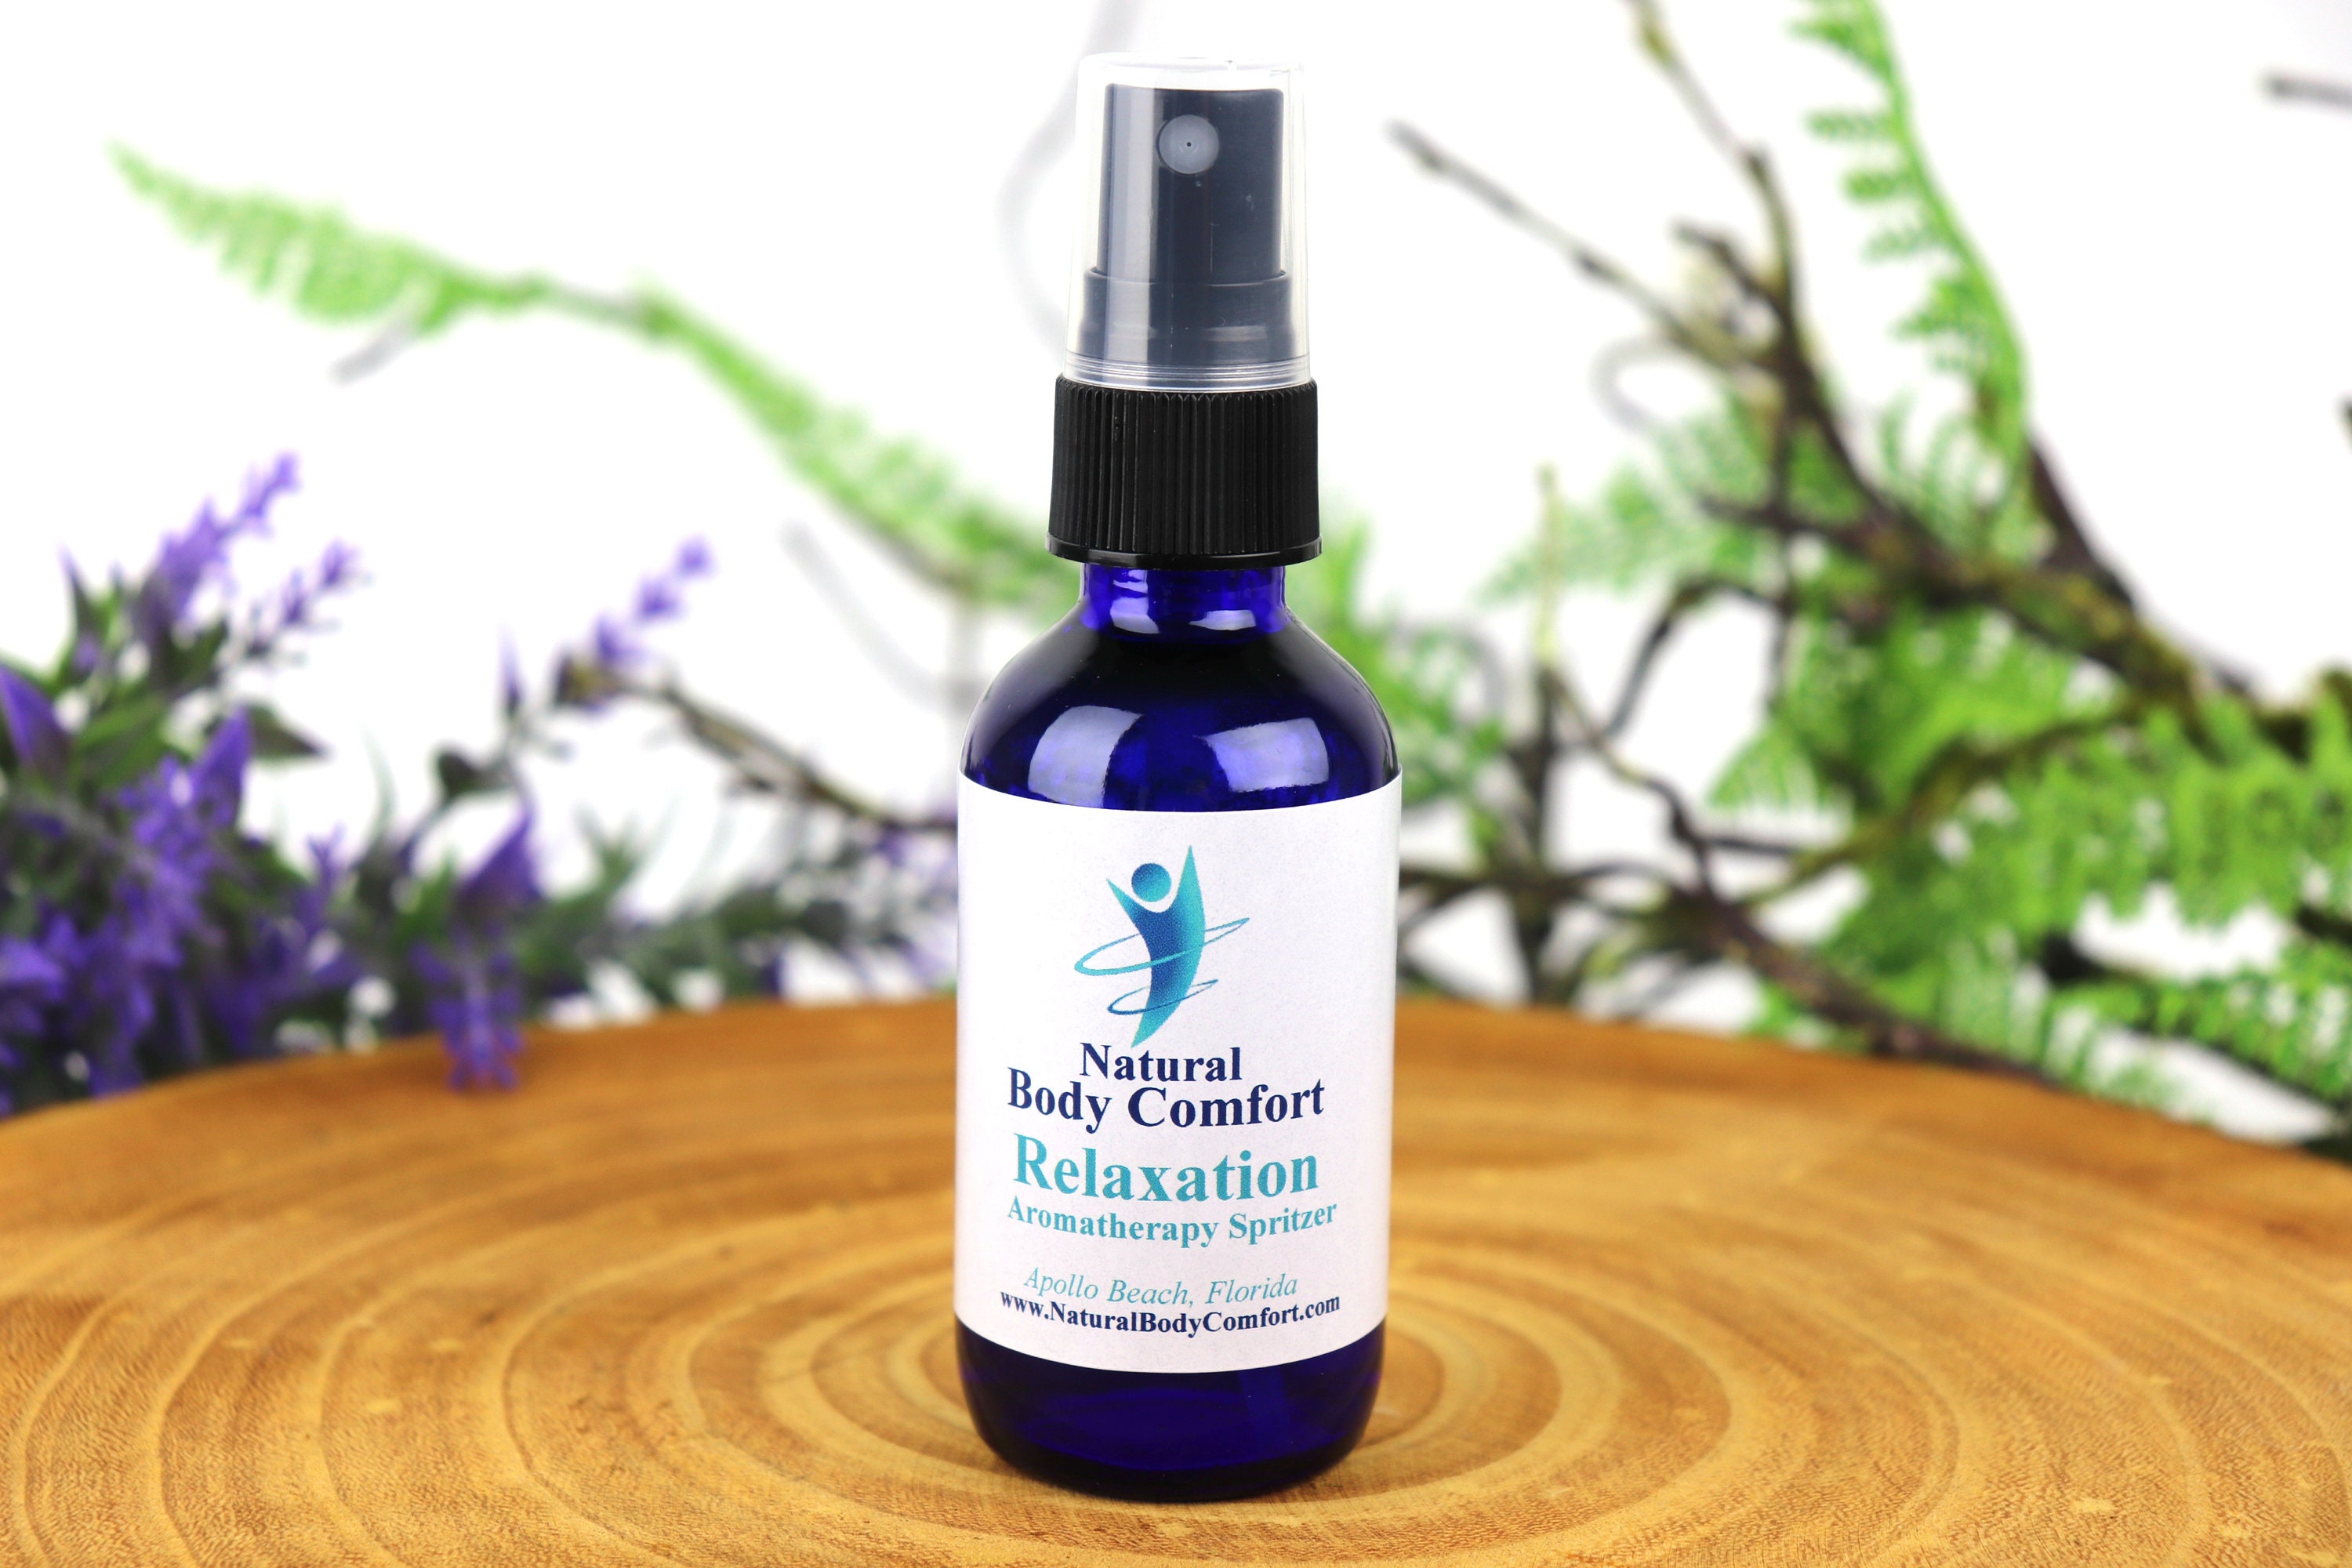 Relaxation Essential Oil Blend Spritzer For Microwavable Heating Pads - Designed To Enhance Our Natural Therapy Rice Bags, Free Shipping